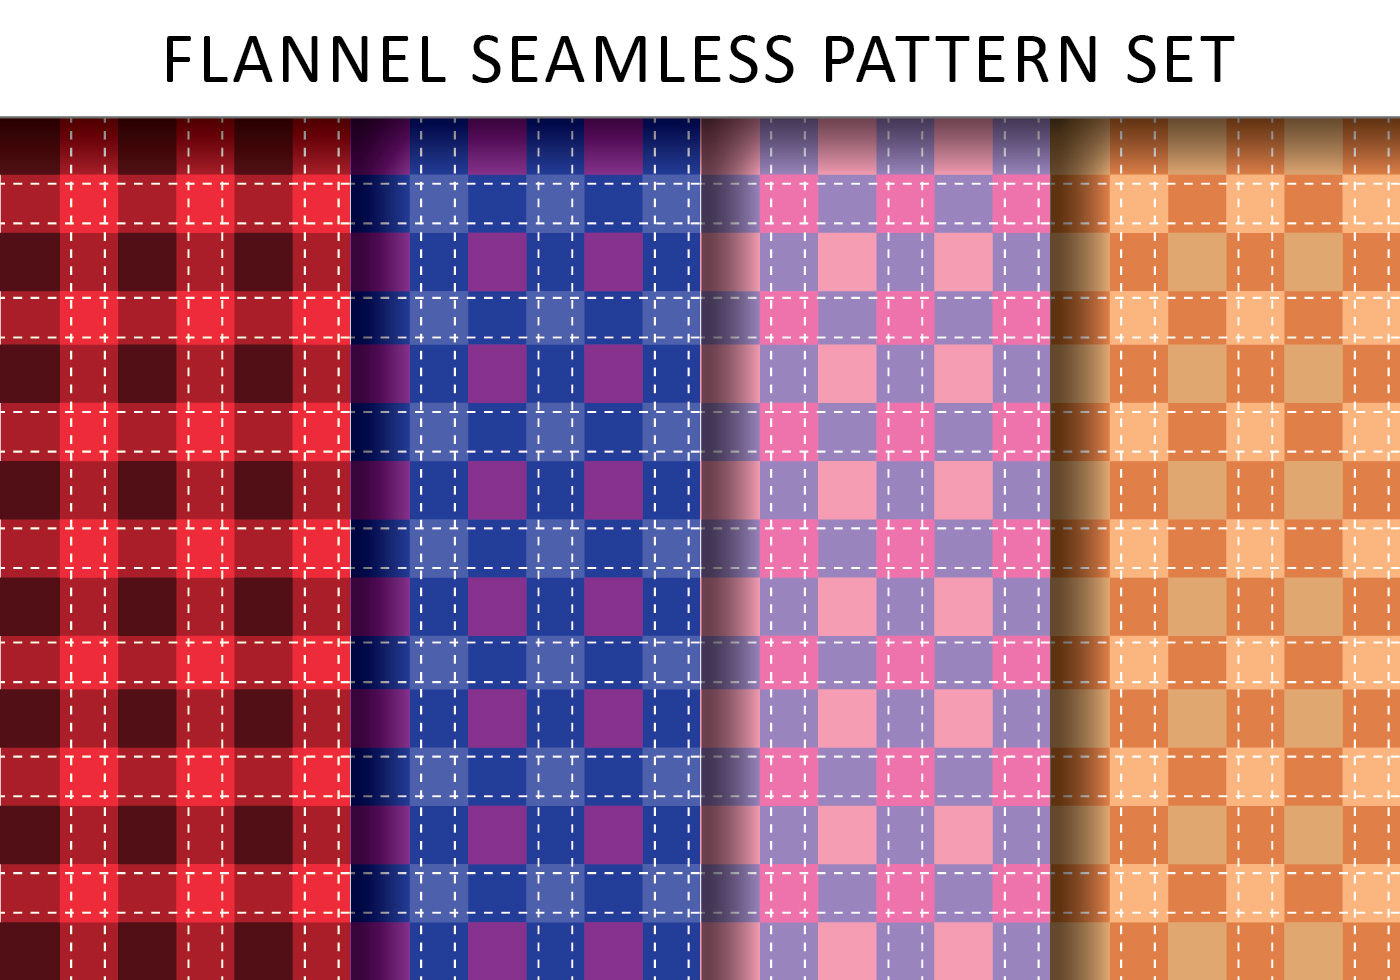 Casual Flannel Pattern Download Free Vector Art Stock HD Wallpapers Download Free Images Wallpaper [wallpaper981.blogspot.com]